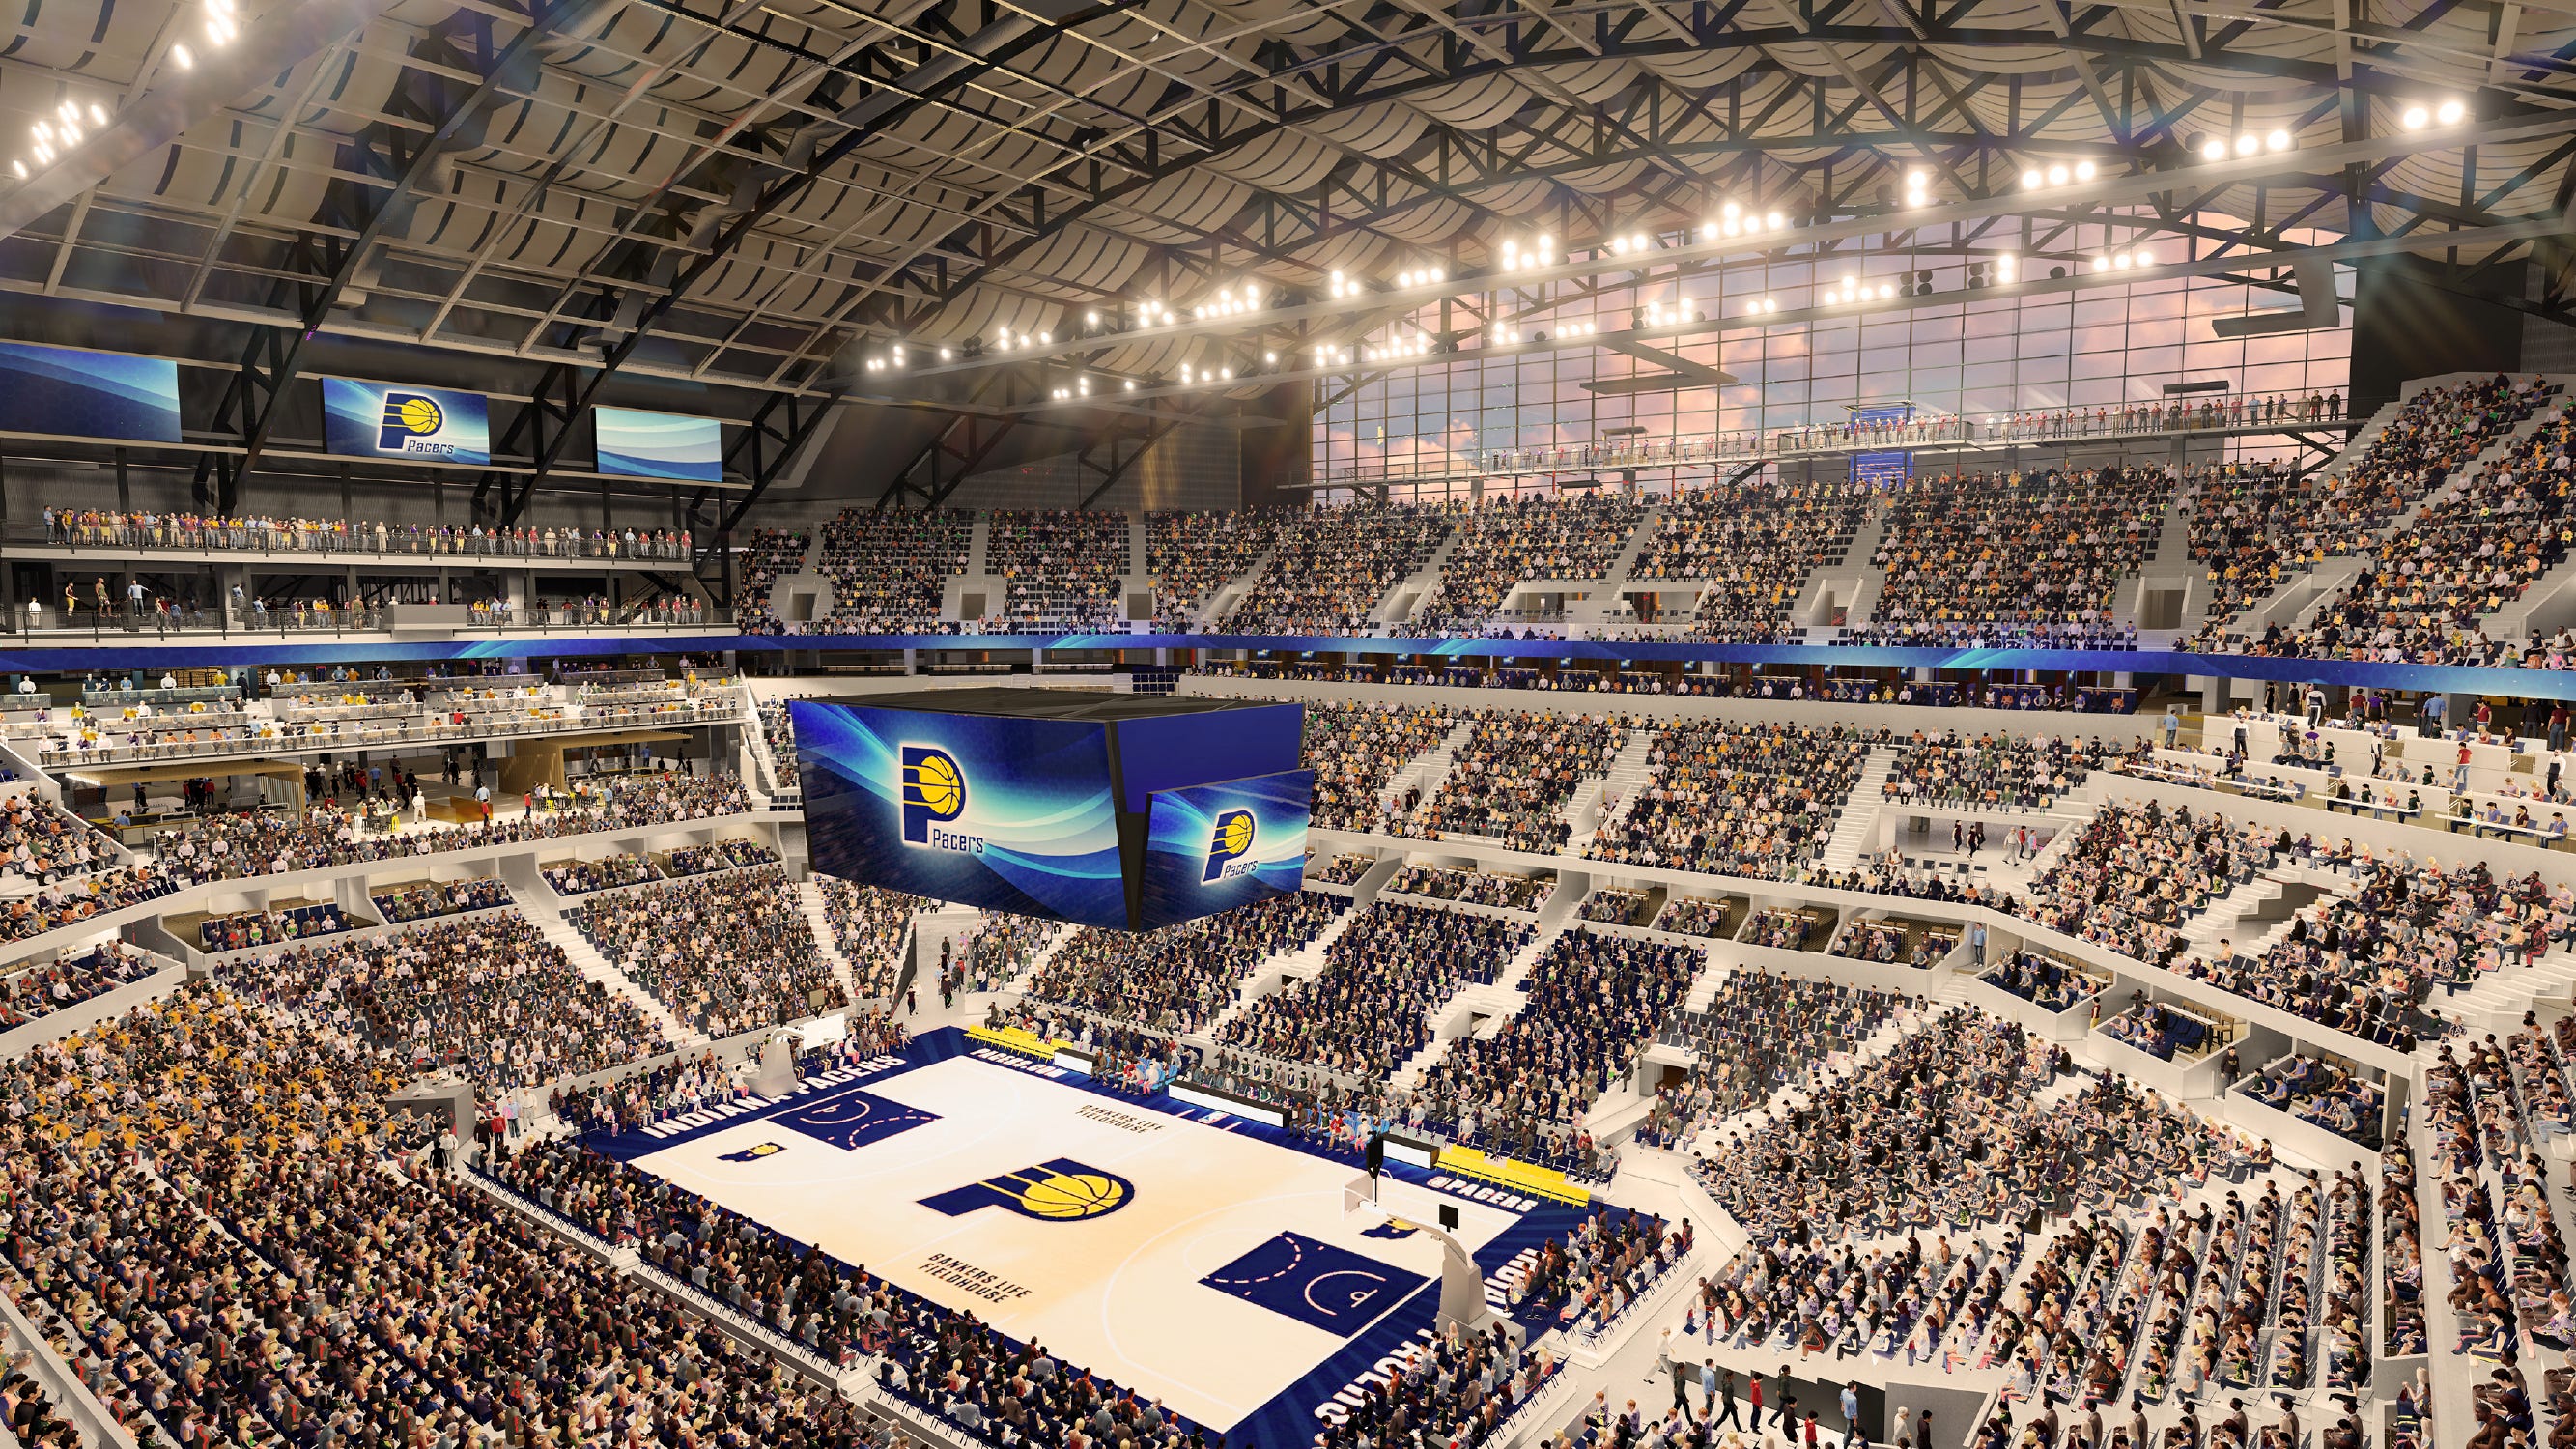 Bankers Life Fieldhouse renovations 